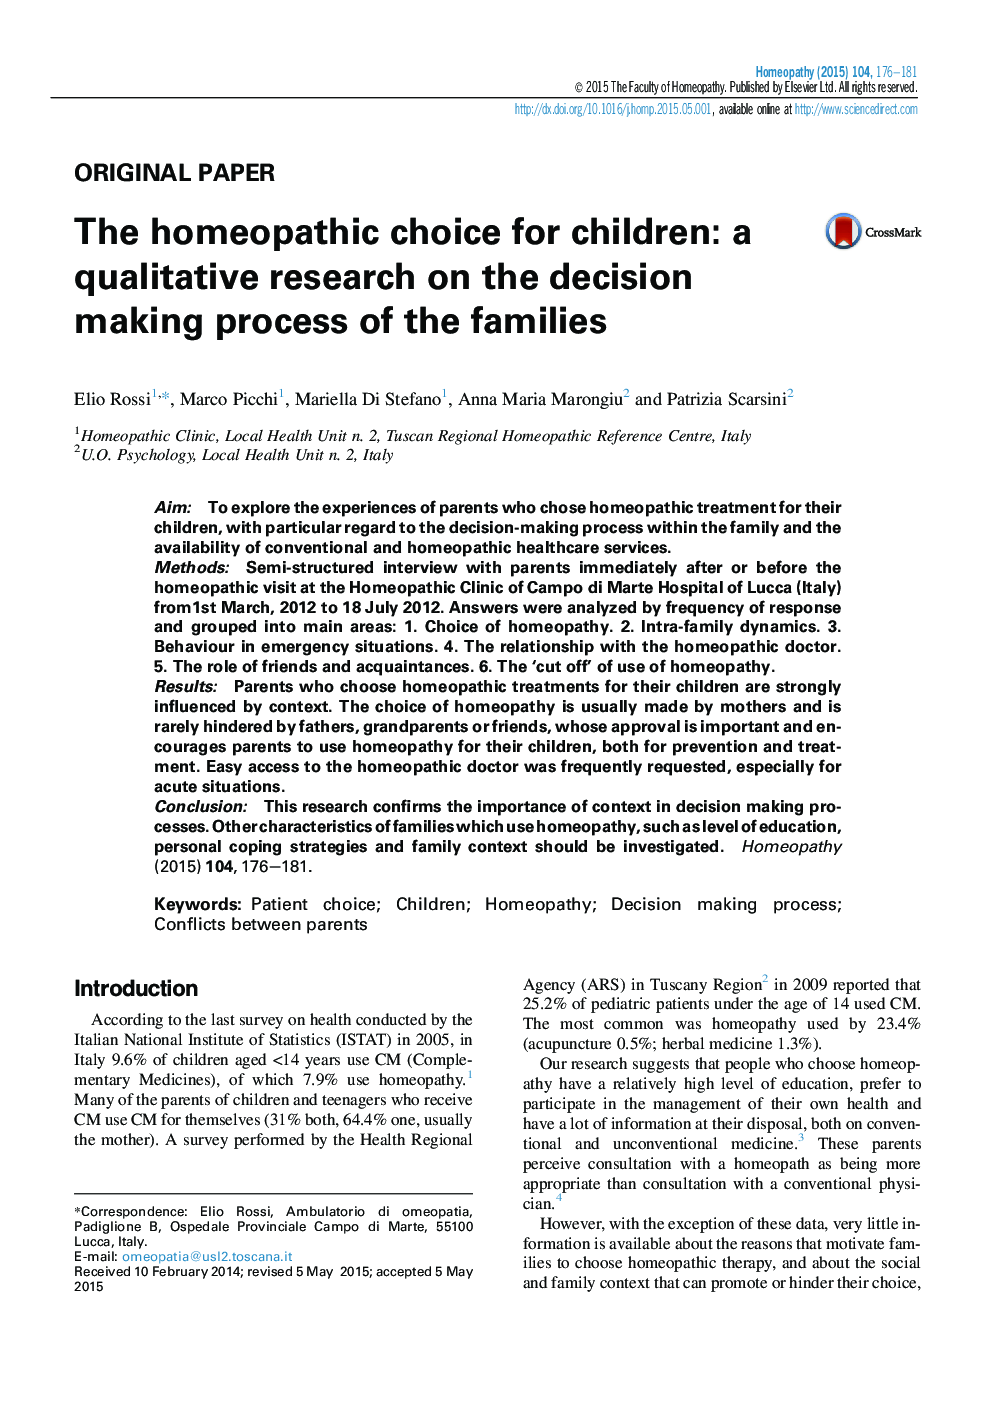 The homeopathic choice for children: a qualitative research on the decision making process of the families